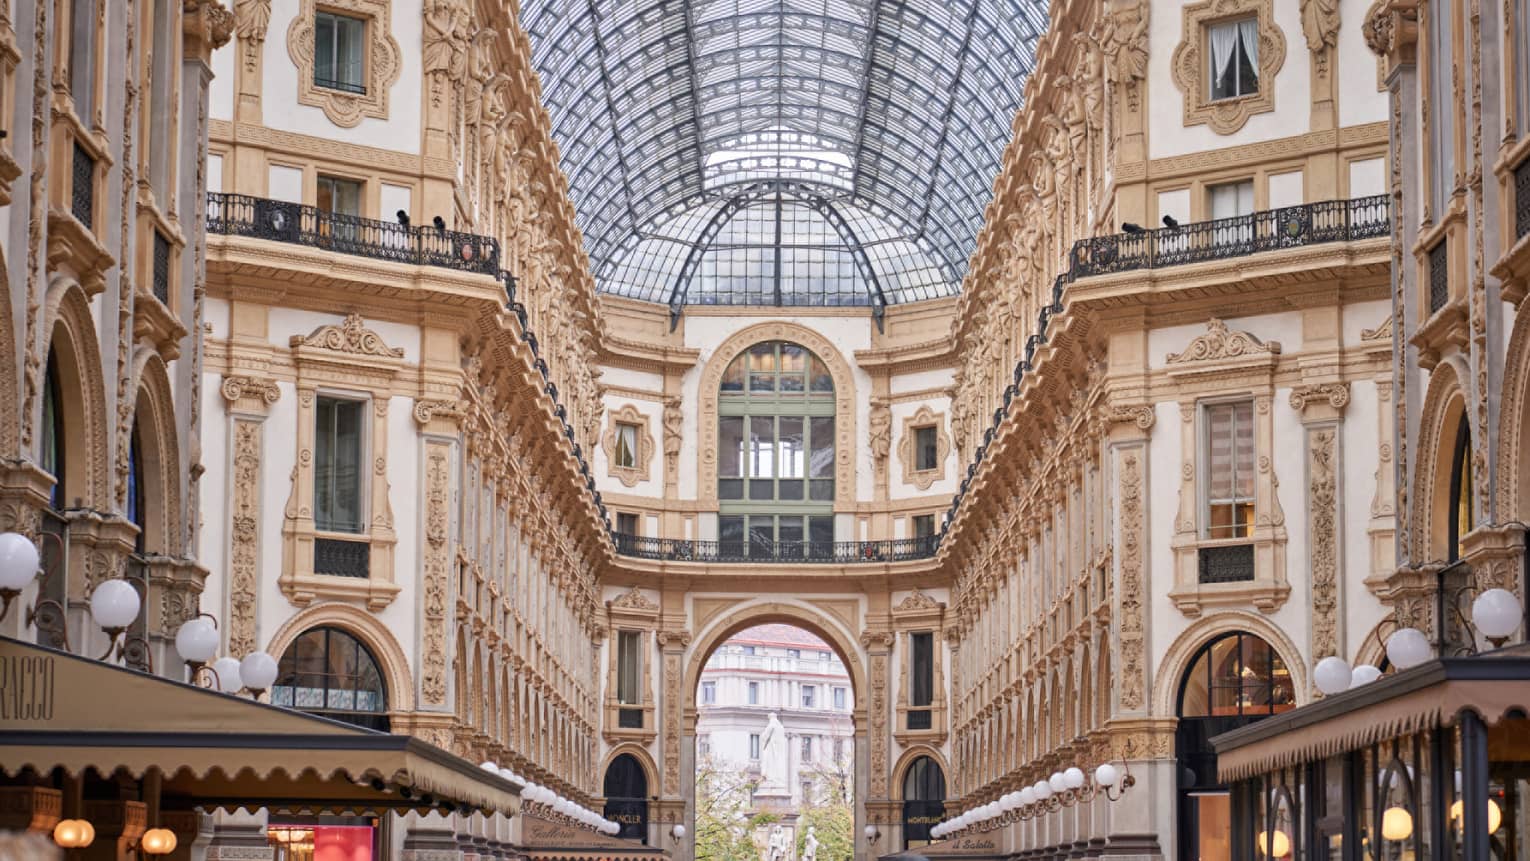 Historic Milan buildings and shops under glass vaulted ceiling